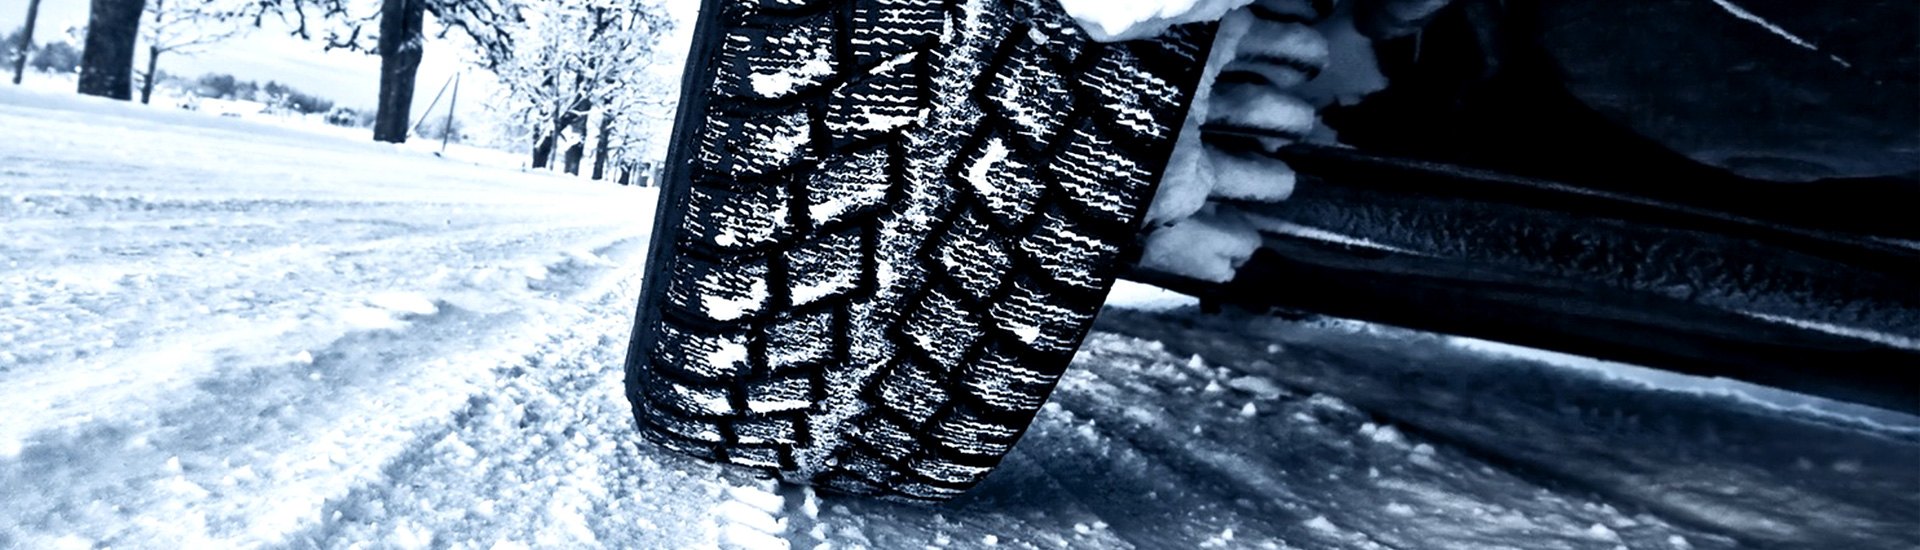 Purchasing Winter Tires | Six Tips To Get The Best Value For Your Money